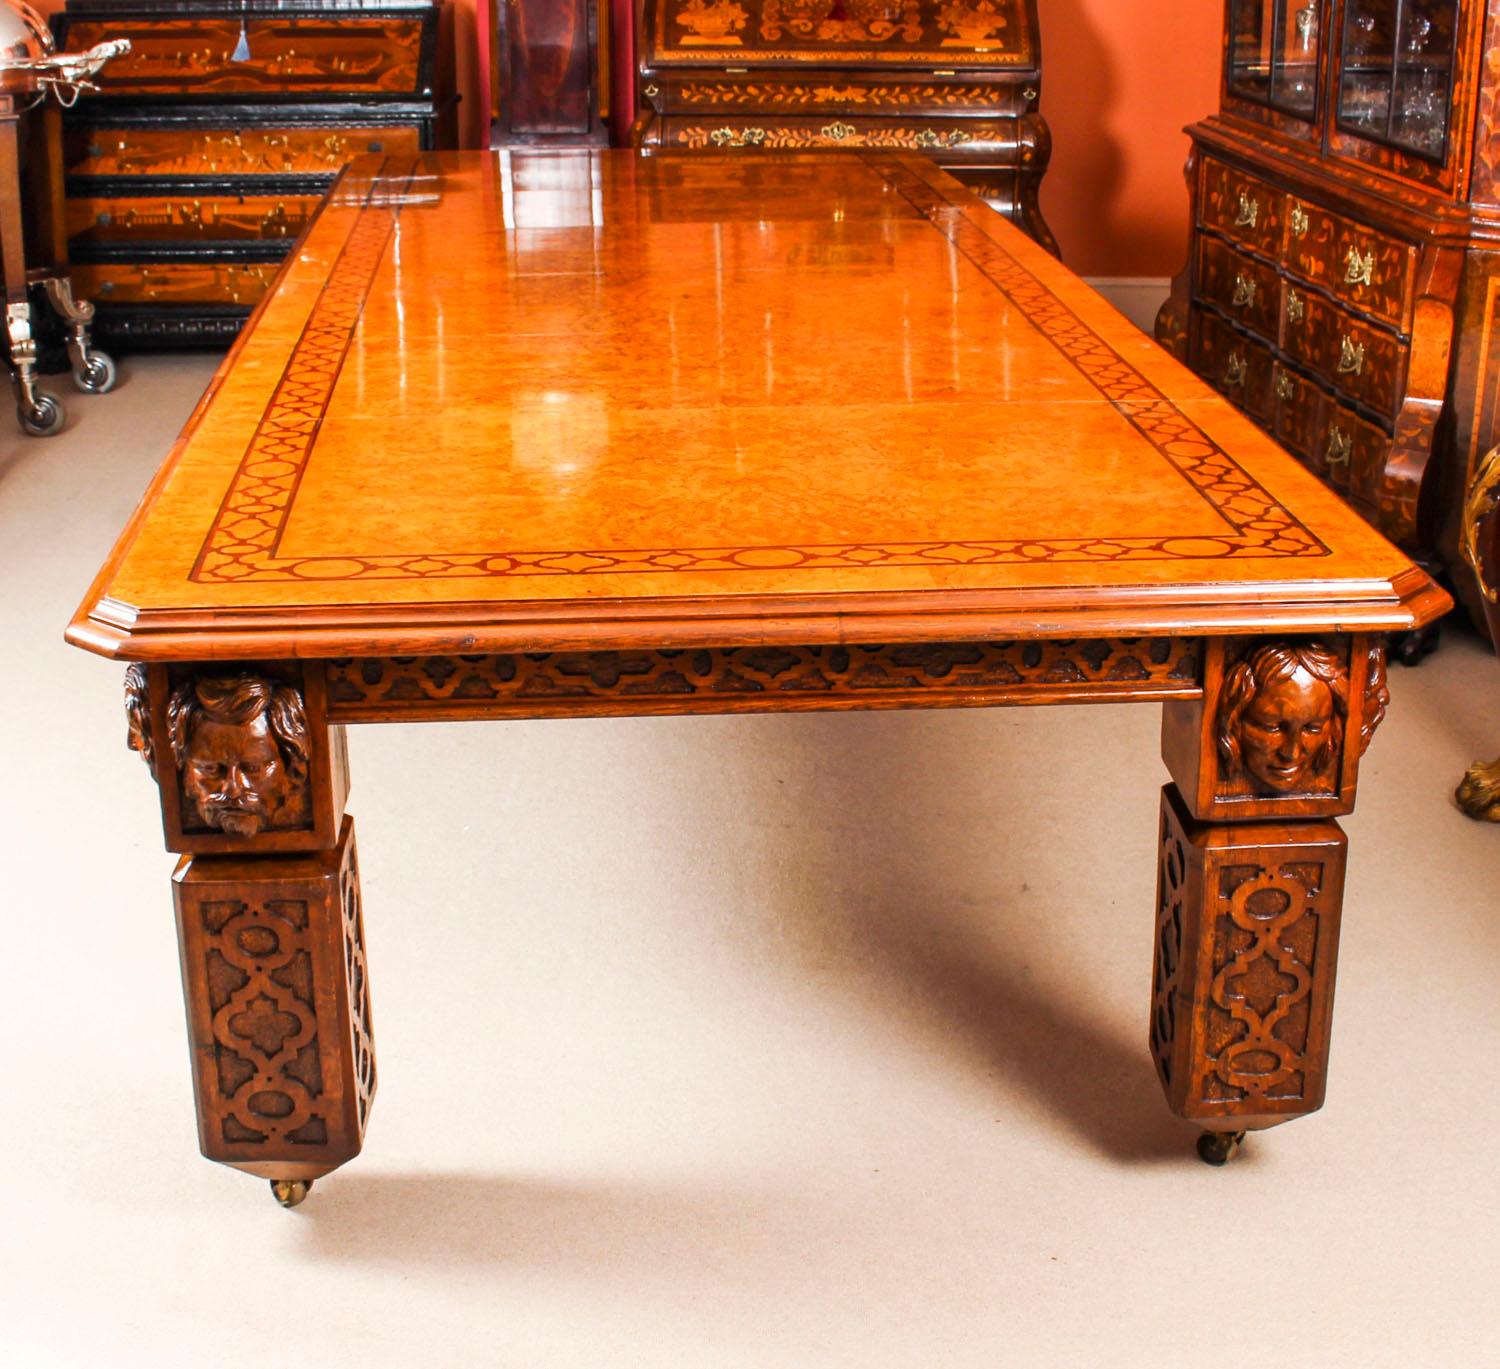 There is no mistaking the style and sophisticated design of this exquisite rare antique English 12ft Elizabethan Revival pollard oak extending dining table, circa 1850 in date.

The striking rectangular pollard oak top with canted corners, inlaid